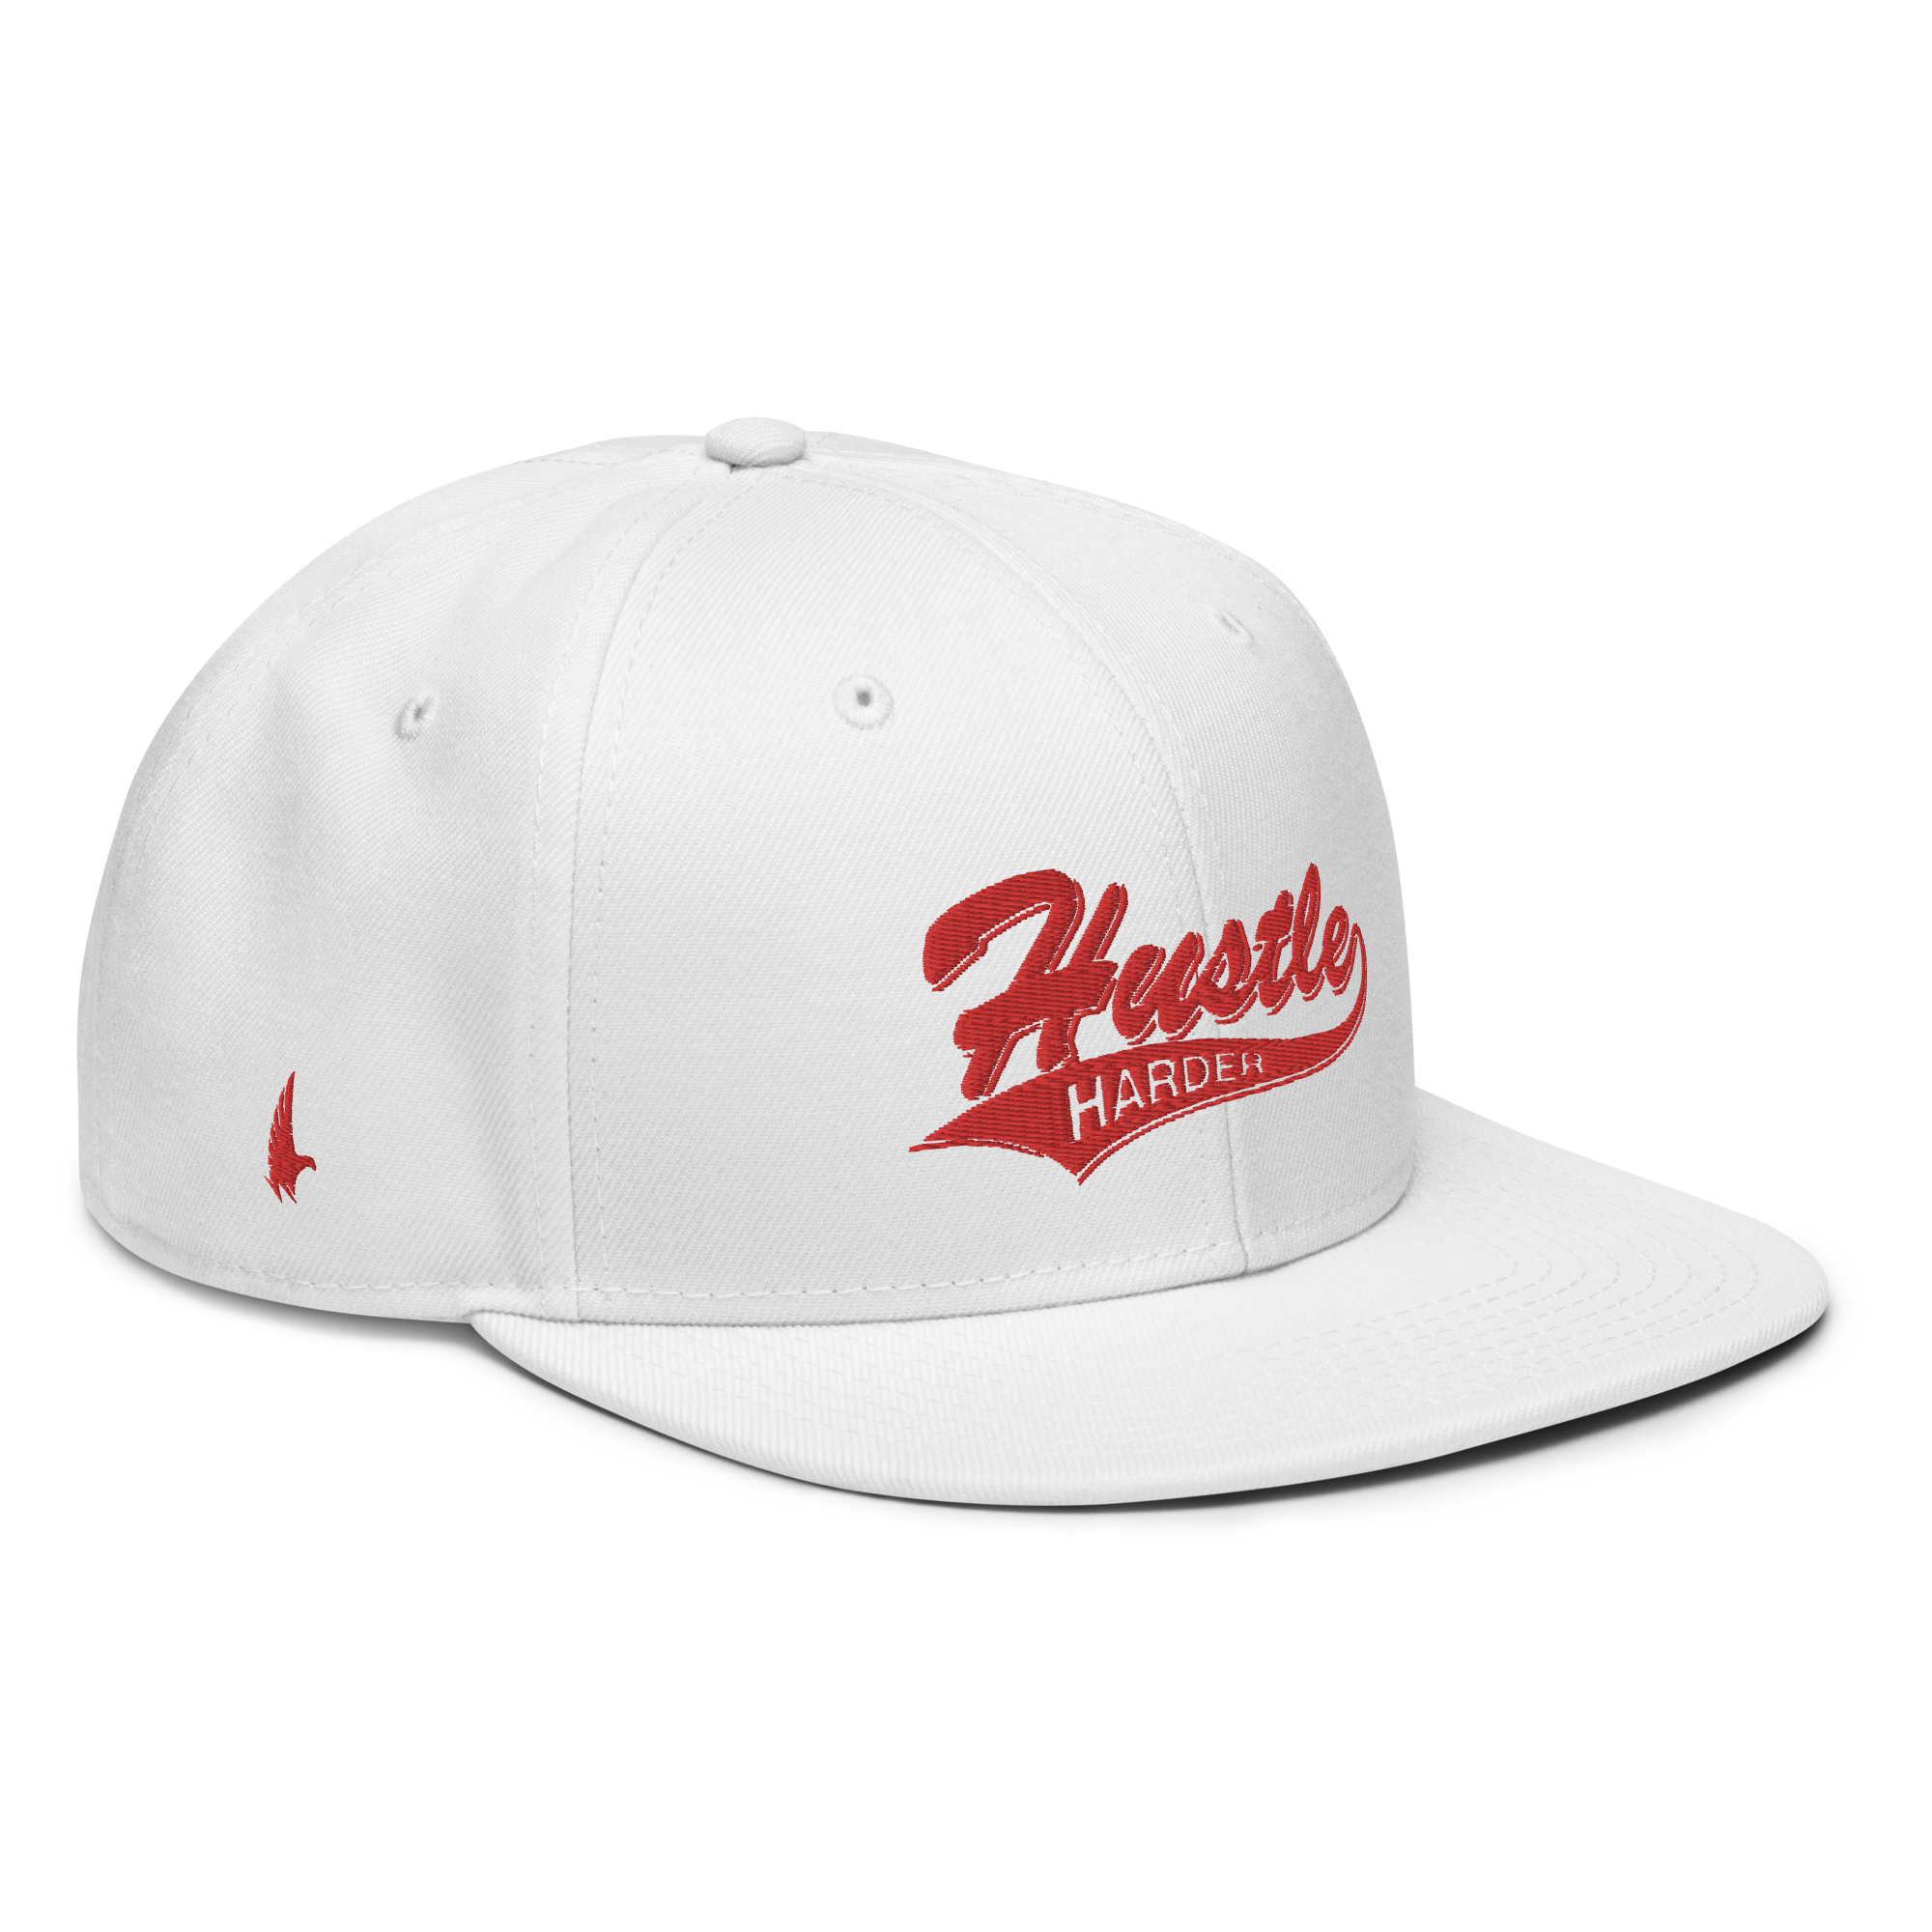 Hustle Harder Snapback Hat - White / Red OS - Loyalty Vibes